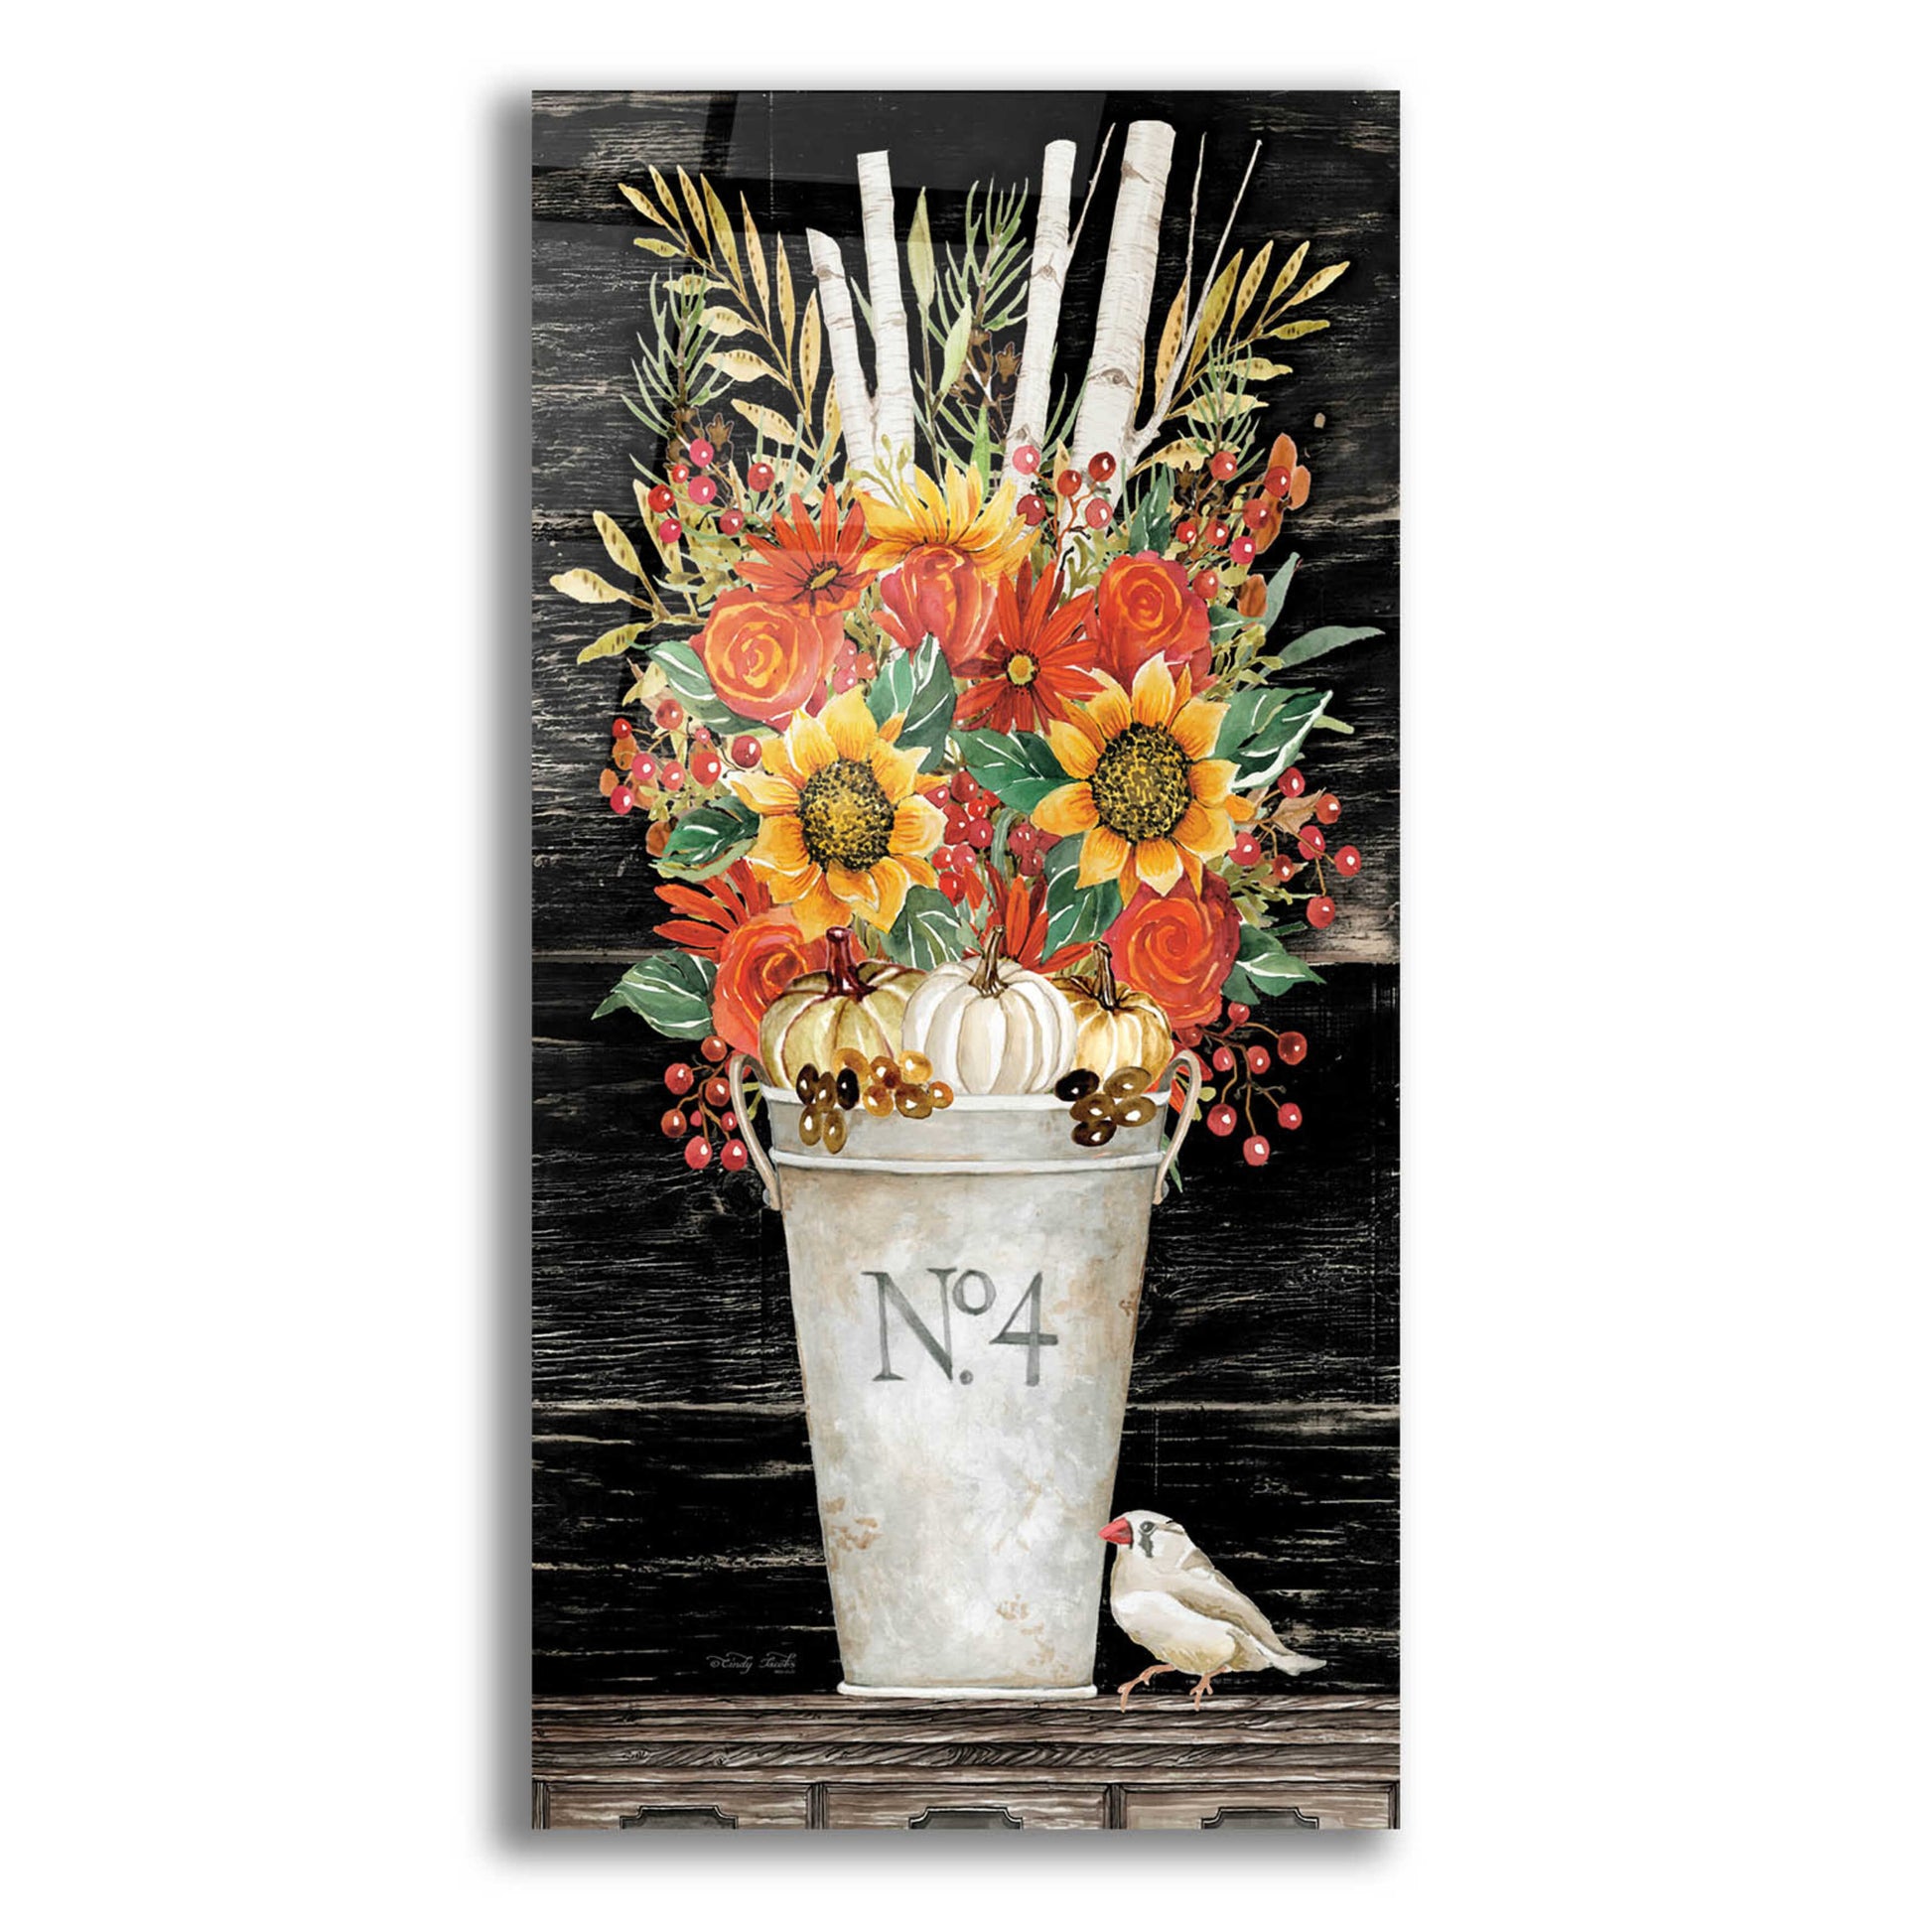 Epic Art 'No. 4 Fall Flowers and Birch 2' by Cindy Jacobs, Acrylic Glass Wall Art,12x24